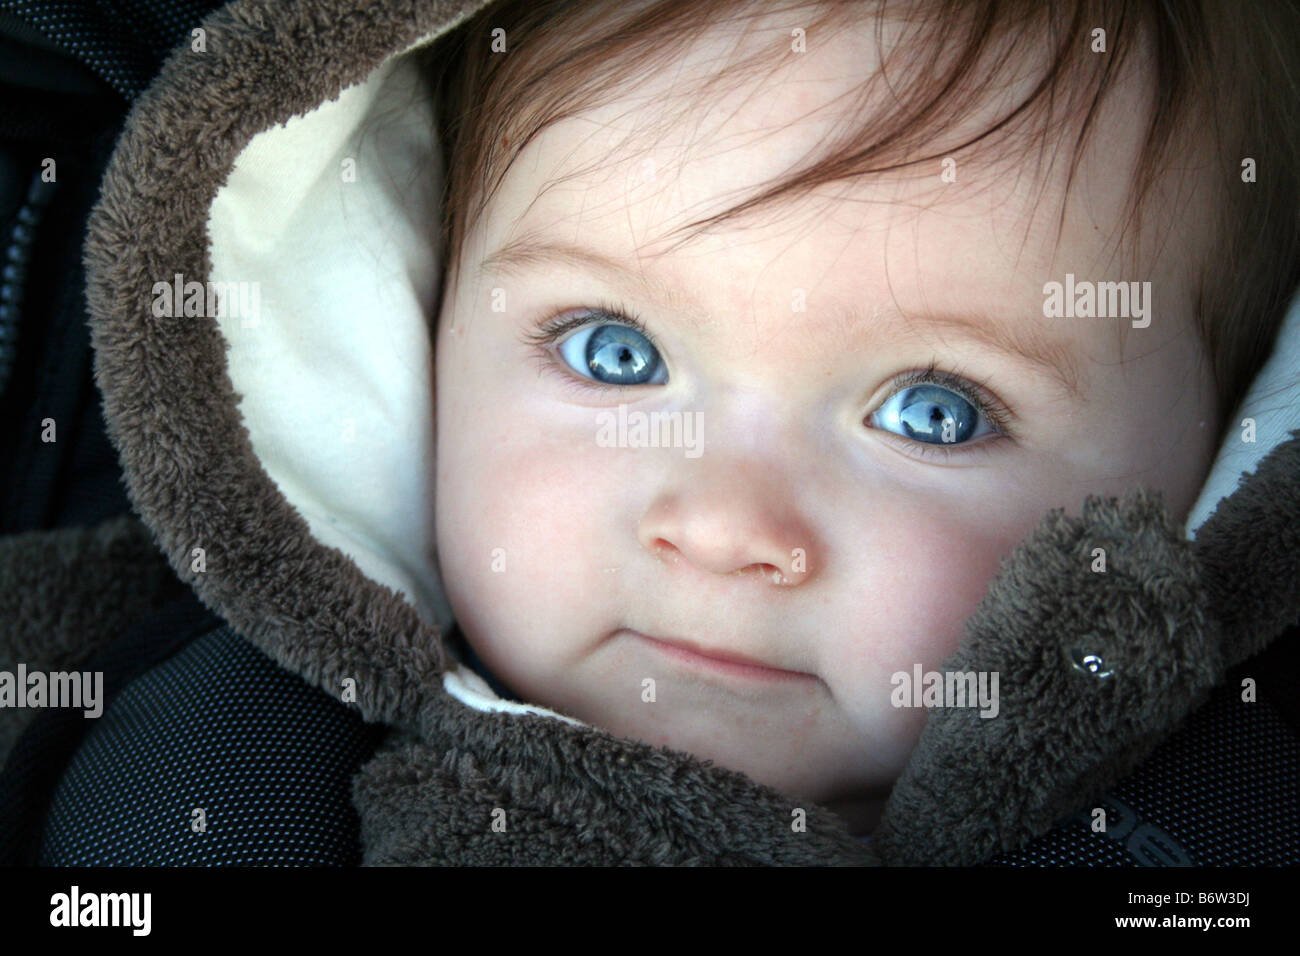 Young baby in snow suit looking beautiful and cute smiling with brown hair and blue eyes Stock Photo